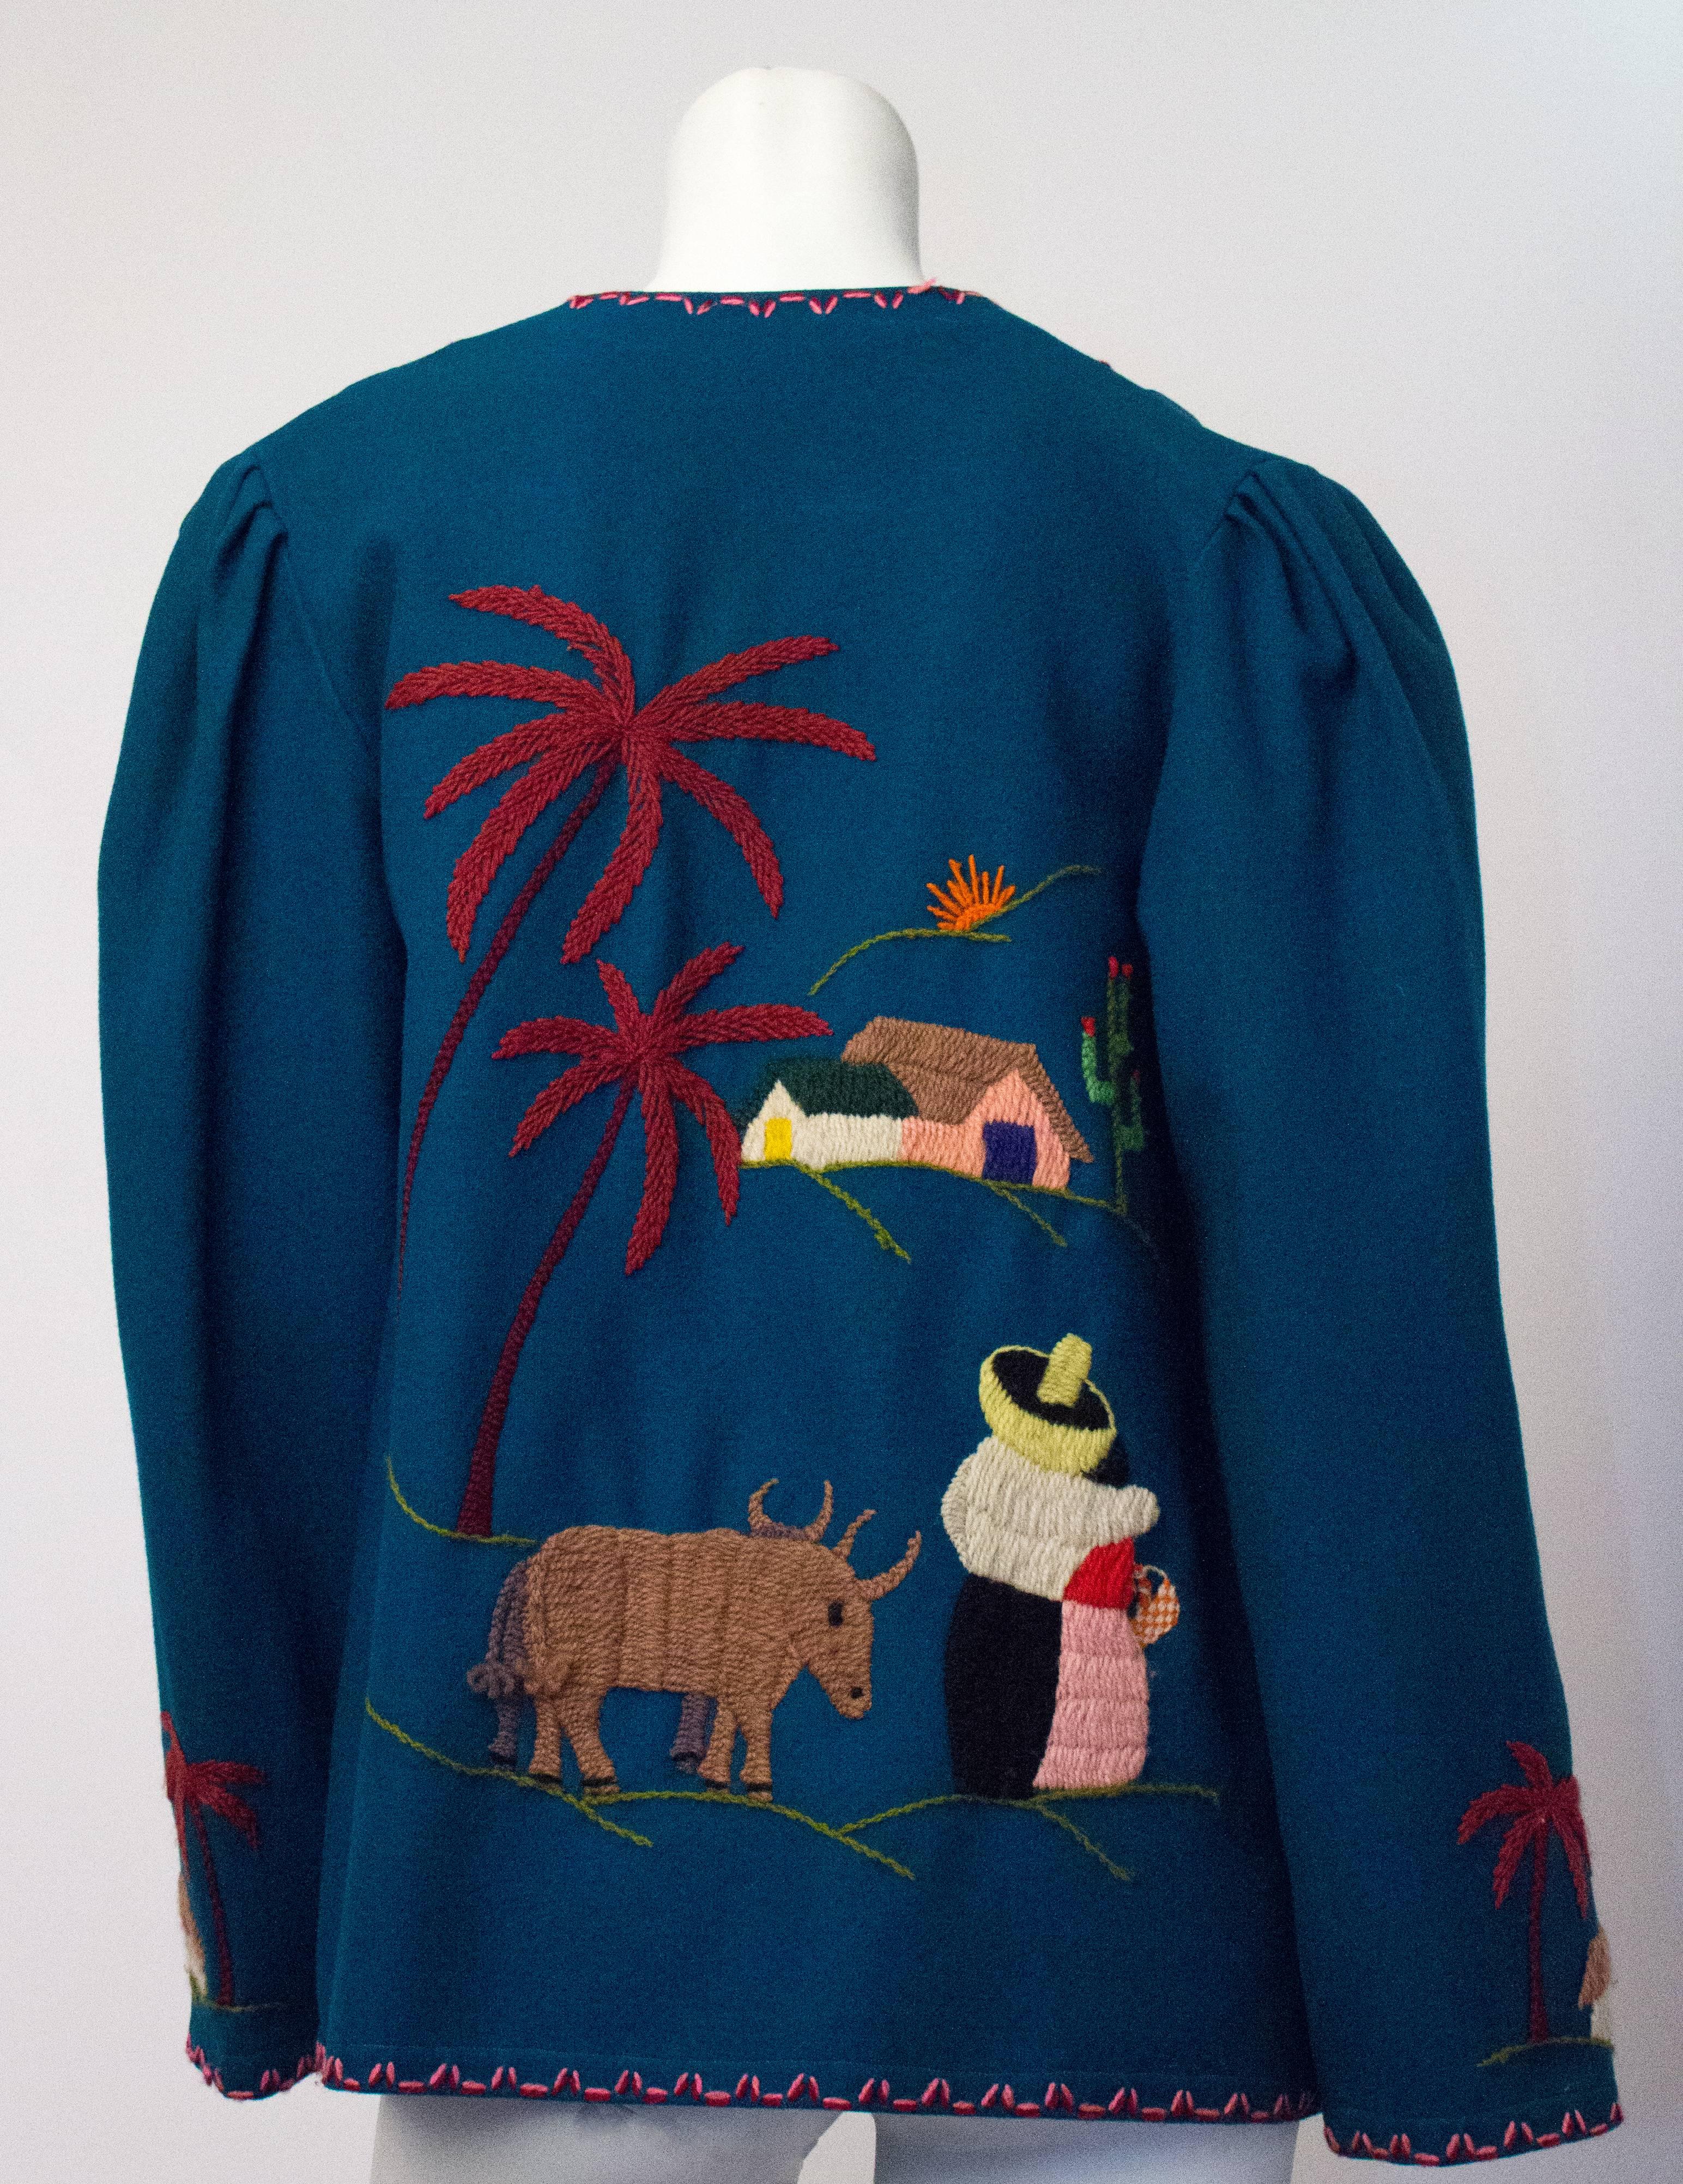 50s blue wool souvenir jacket with hand embroidered scene of palm trees, cactus and bulls. Pleated shoulders. 

